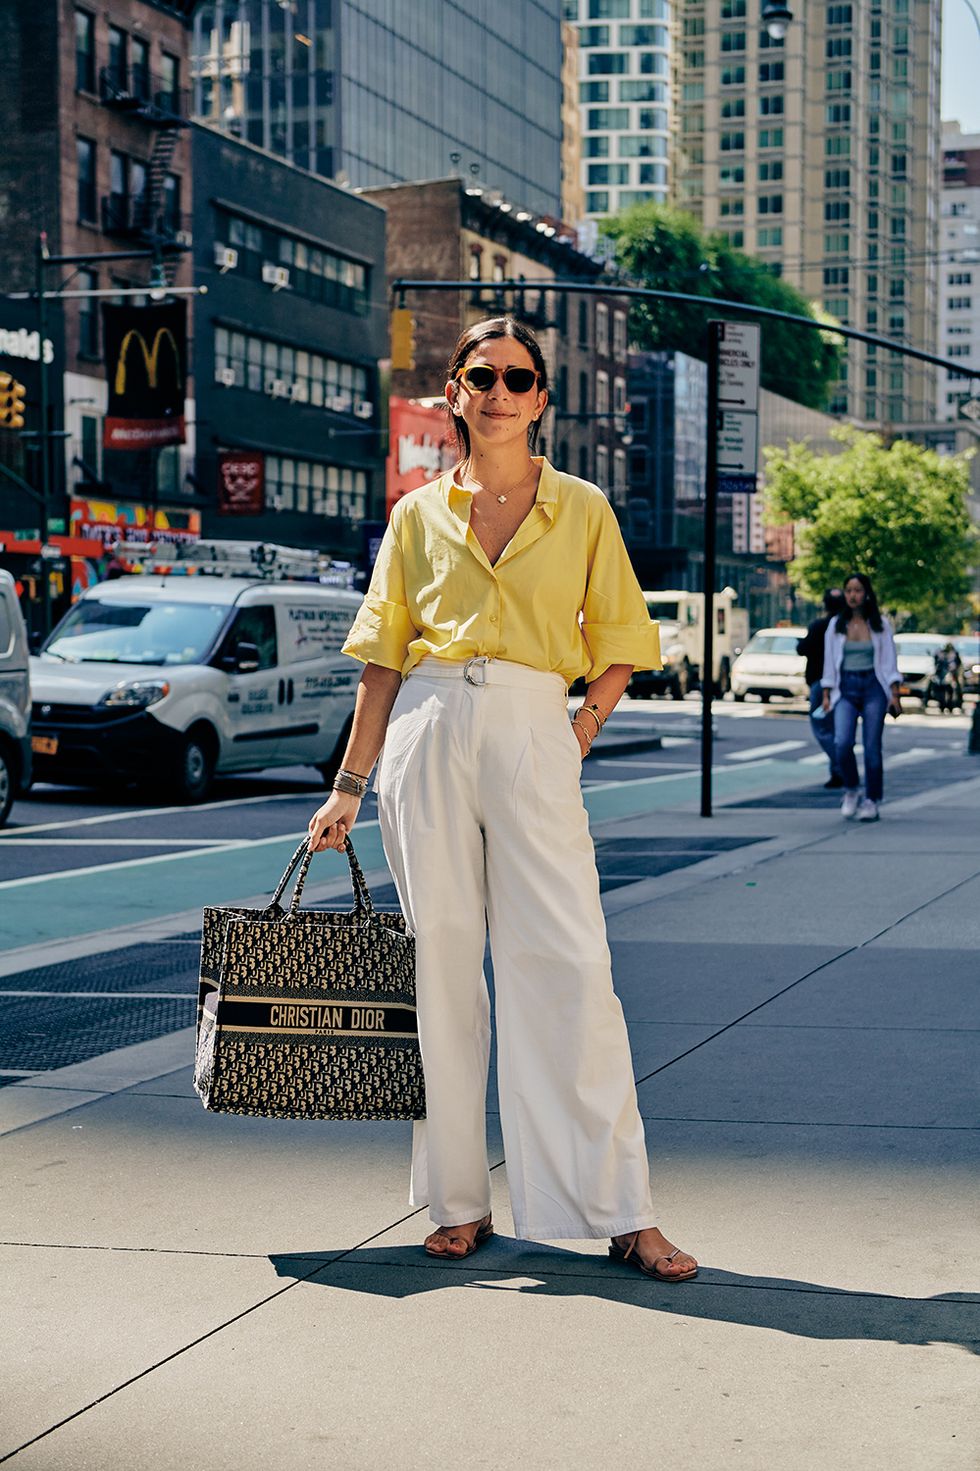 Work Outfit Ideas Approved by Nordstrom Stylists